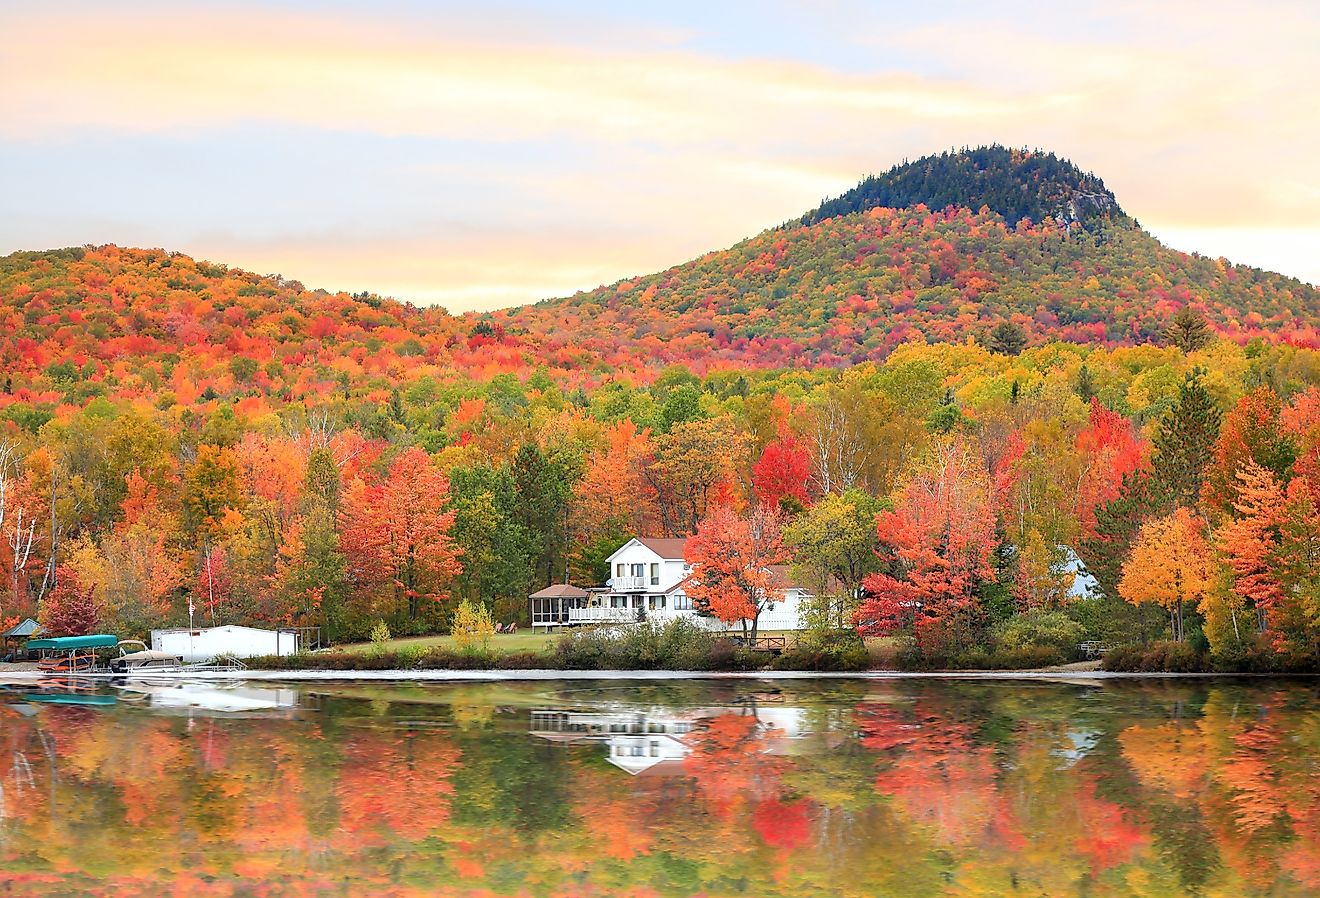 Autumn landscape over the lake in Vermont near Groton.